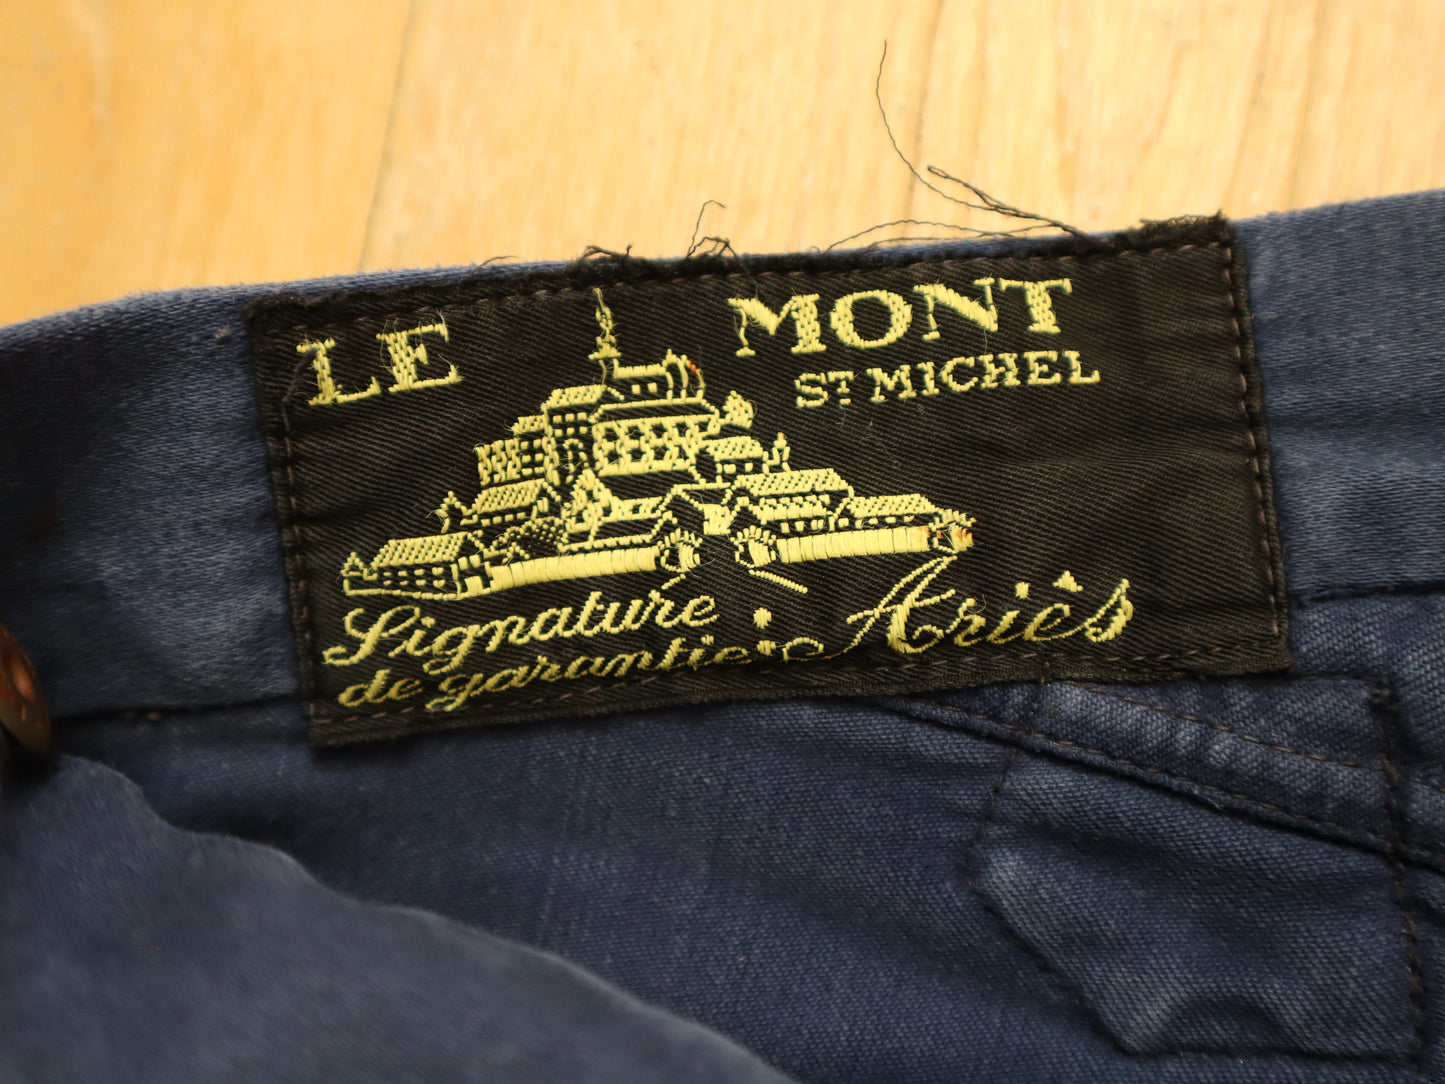 French Le Mont St Michel Blue Moleskin Workwear Trousers Pants Repairs Darned 1950s